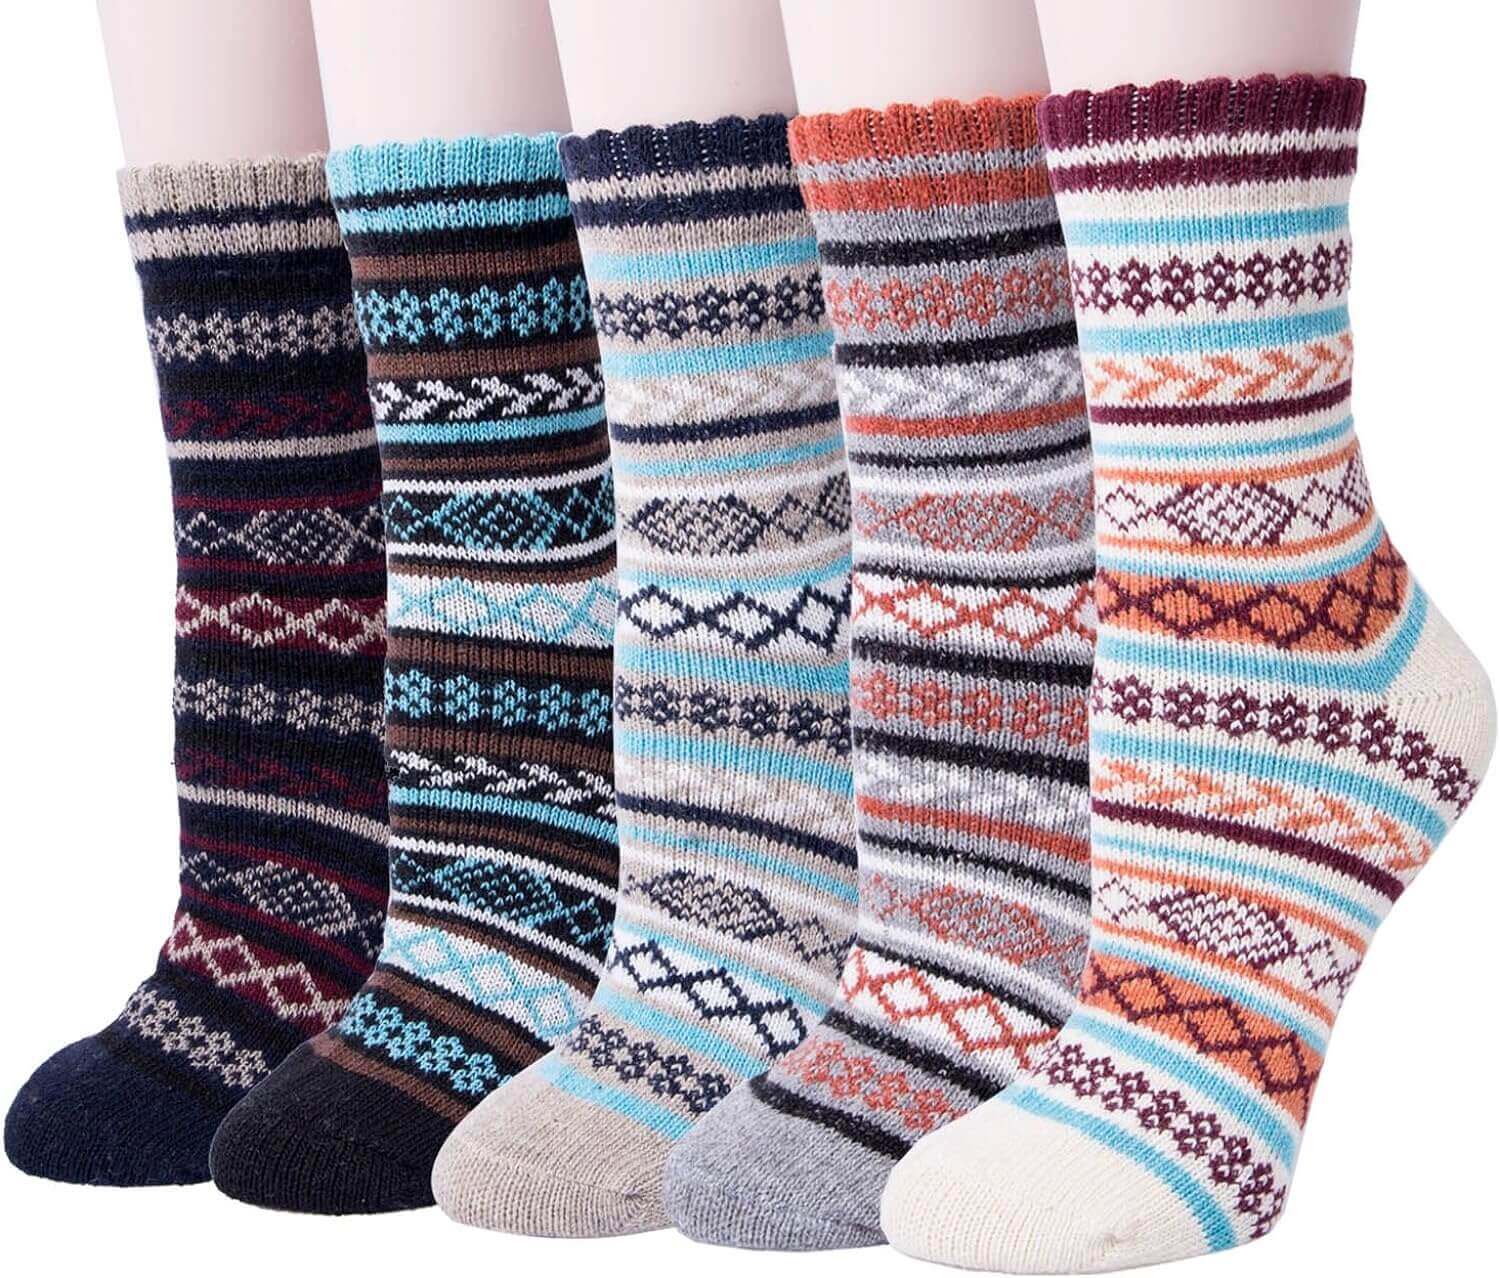 Shop The Latest >5 Pack Women's Thick Knit Wool Socks Winter Warm Socks > *Only $22.80*> From The Top Brand > *Senker Fashionl* > Shop Now and Get Free Shipping On Orders Over $45.00 >*Shop Earth Foot*